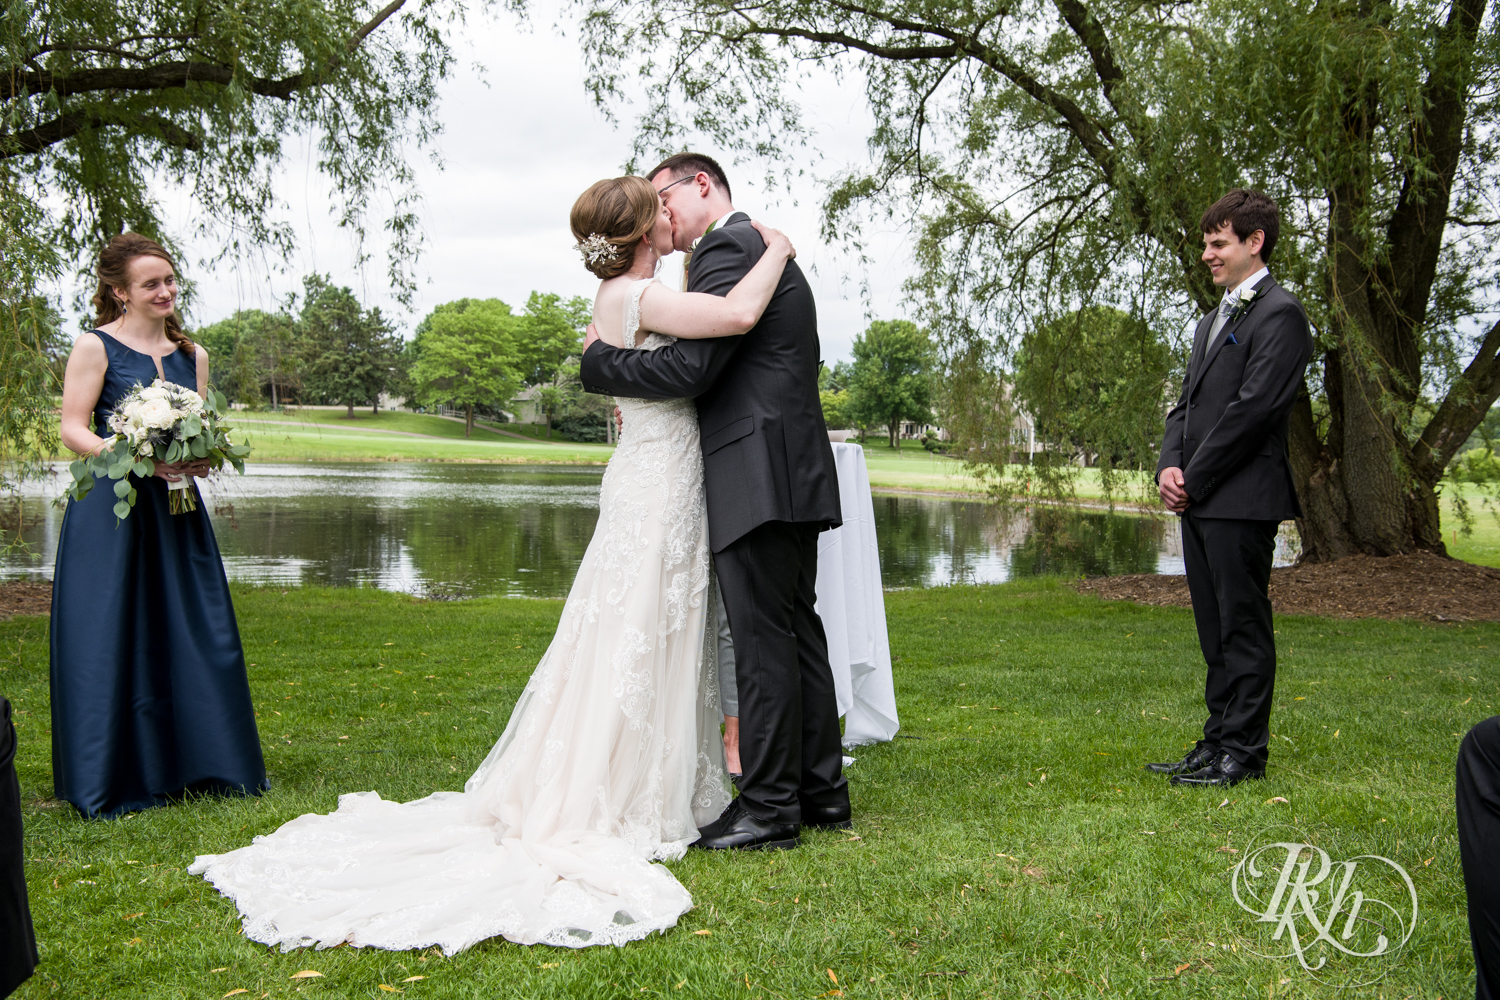 Bride and groom kiss during wedding ceremony at Oak Glen Golf Course in Stillwater, Minnesota.